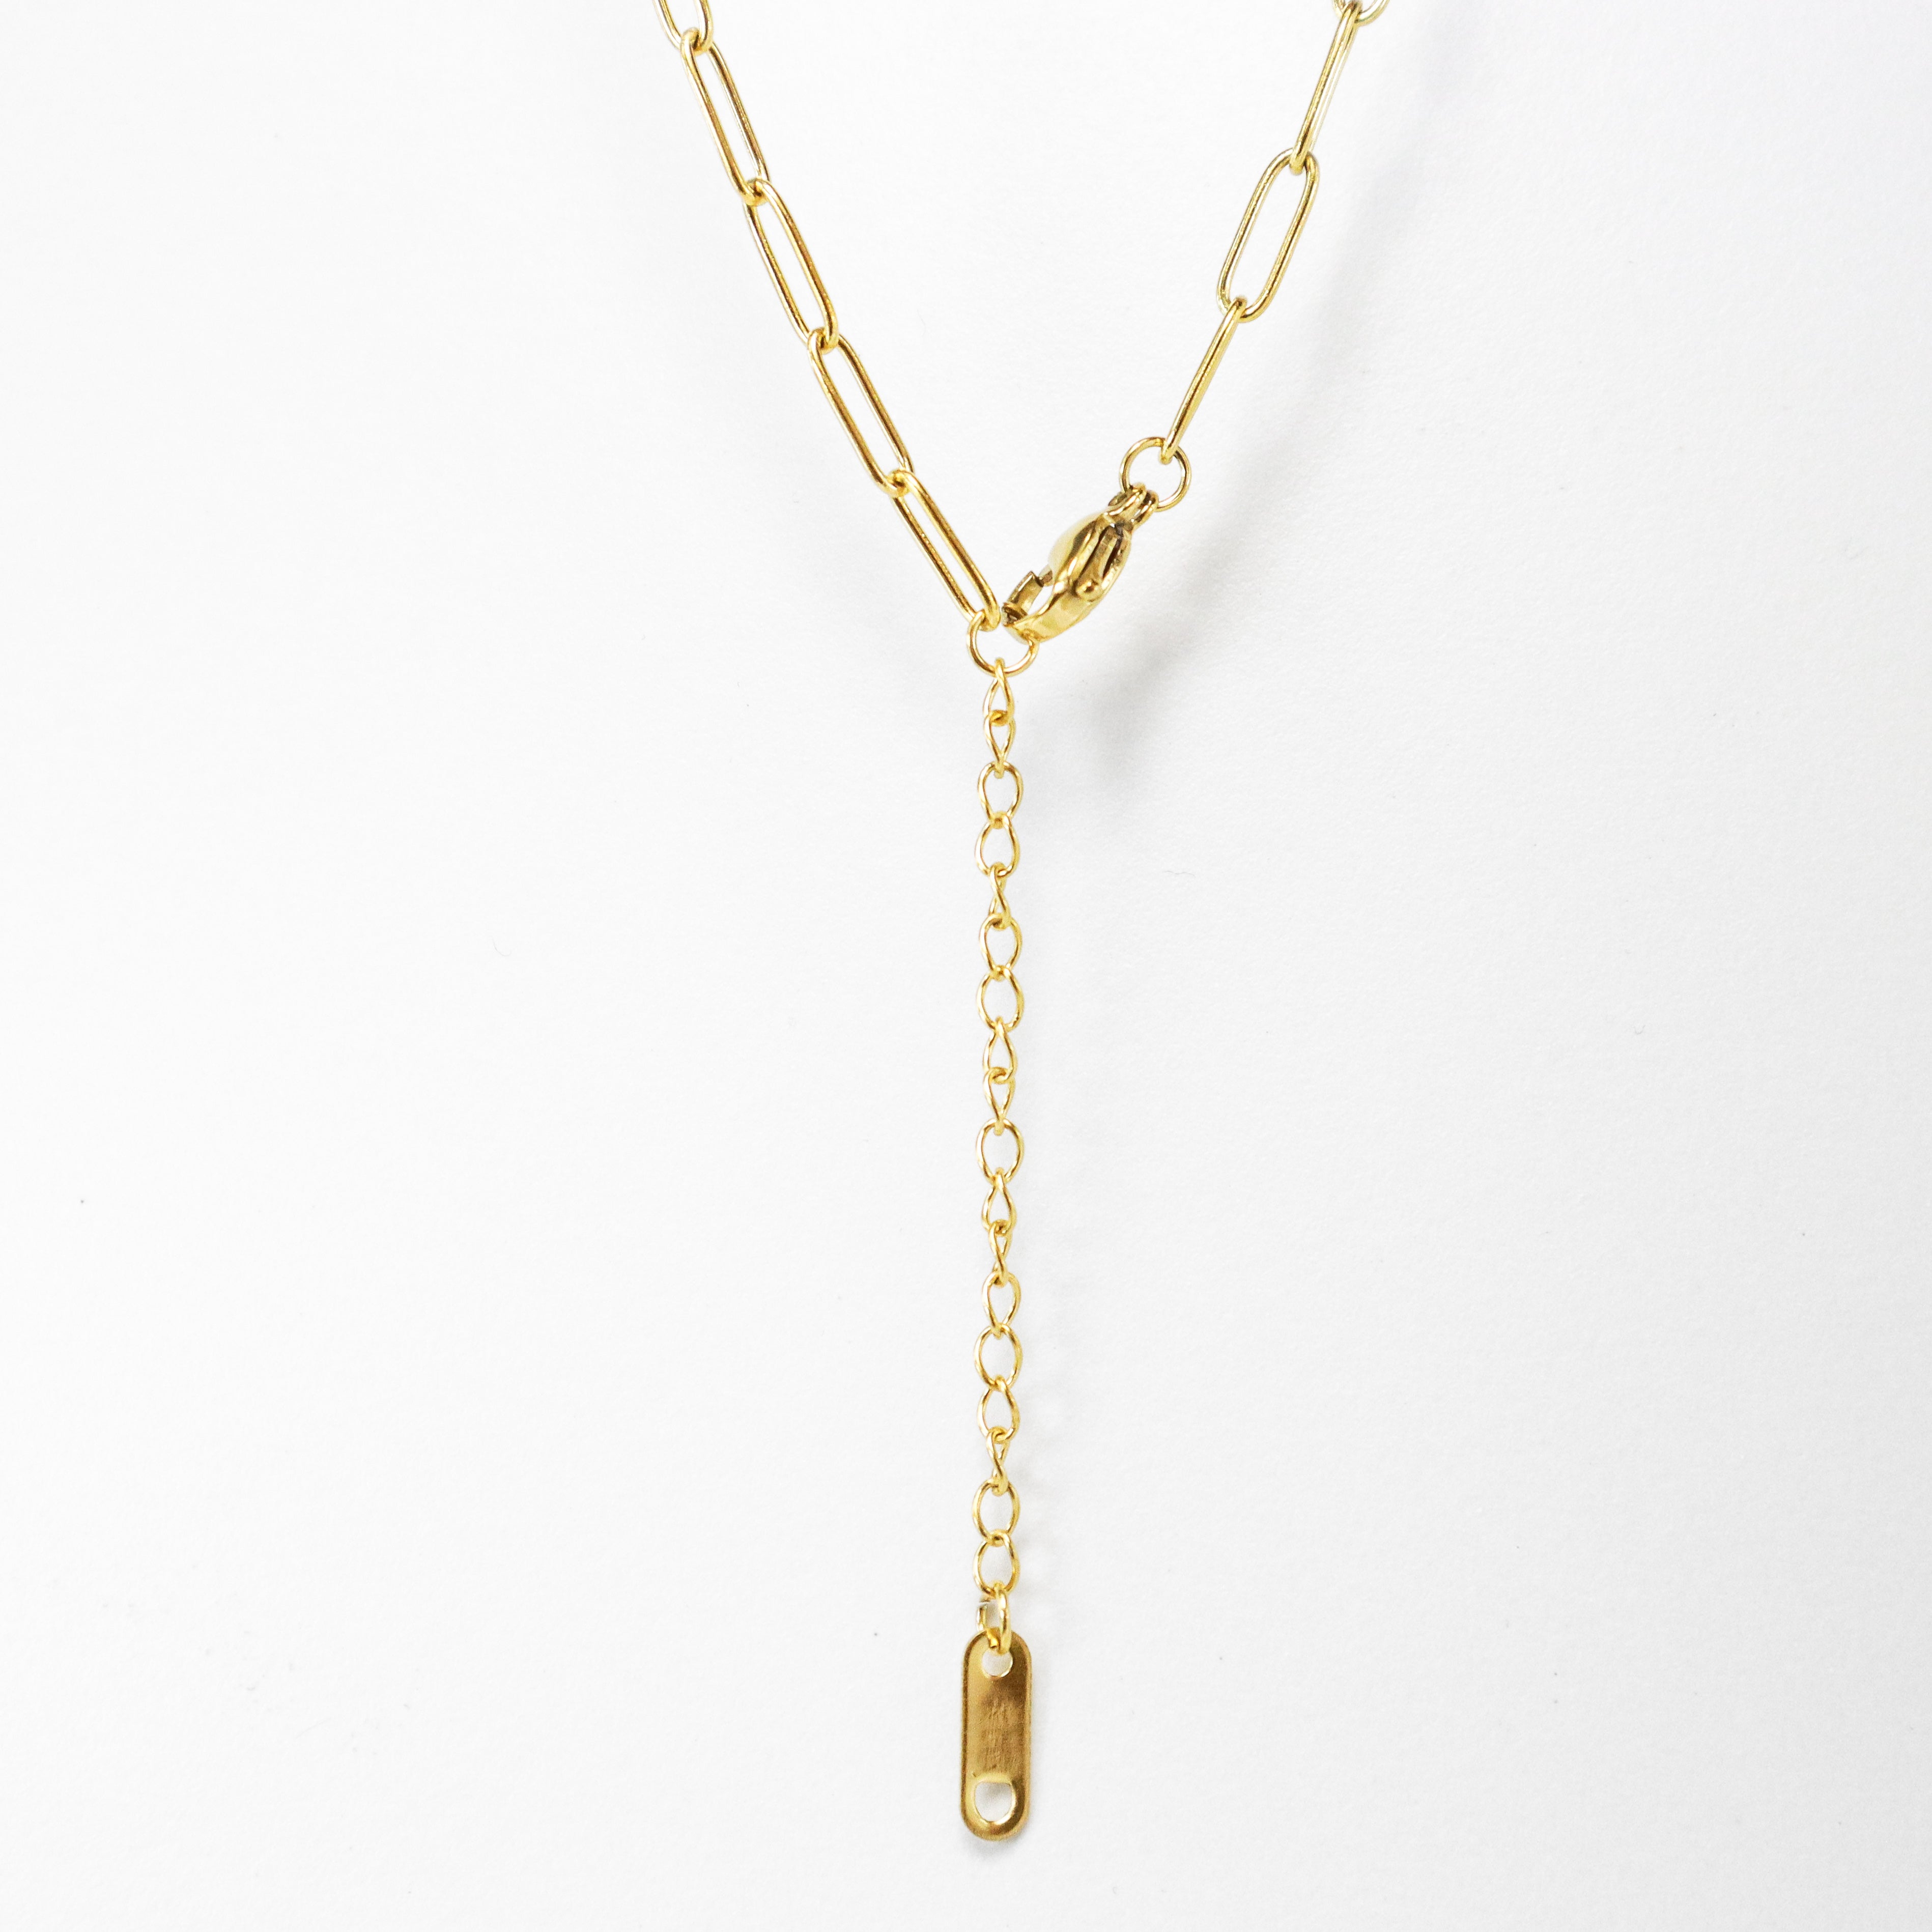 Gold Heart Locket & Staple Chain Necklace